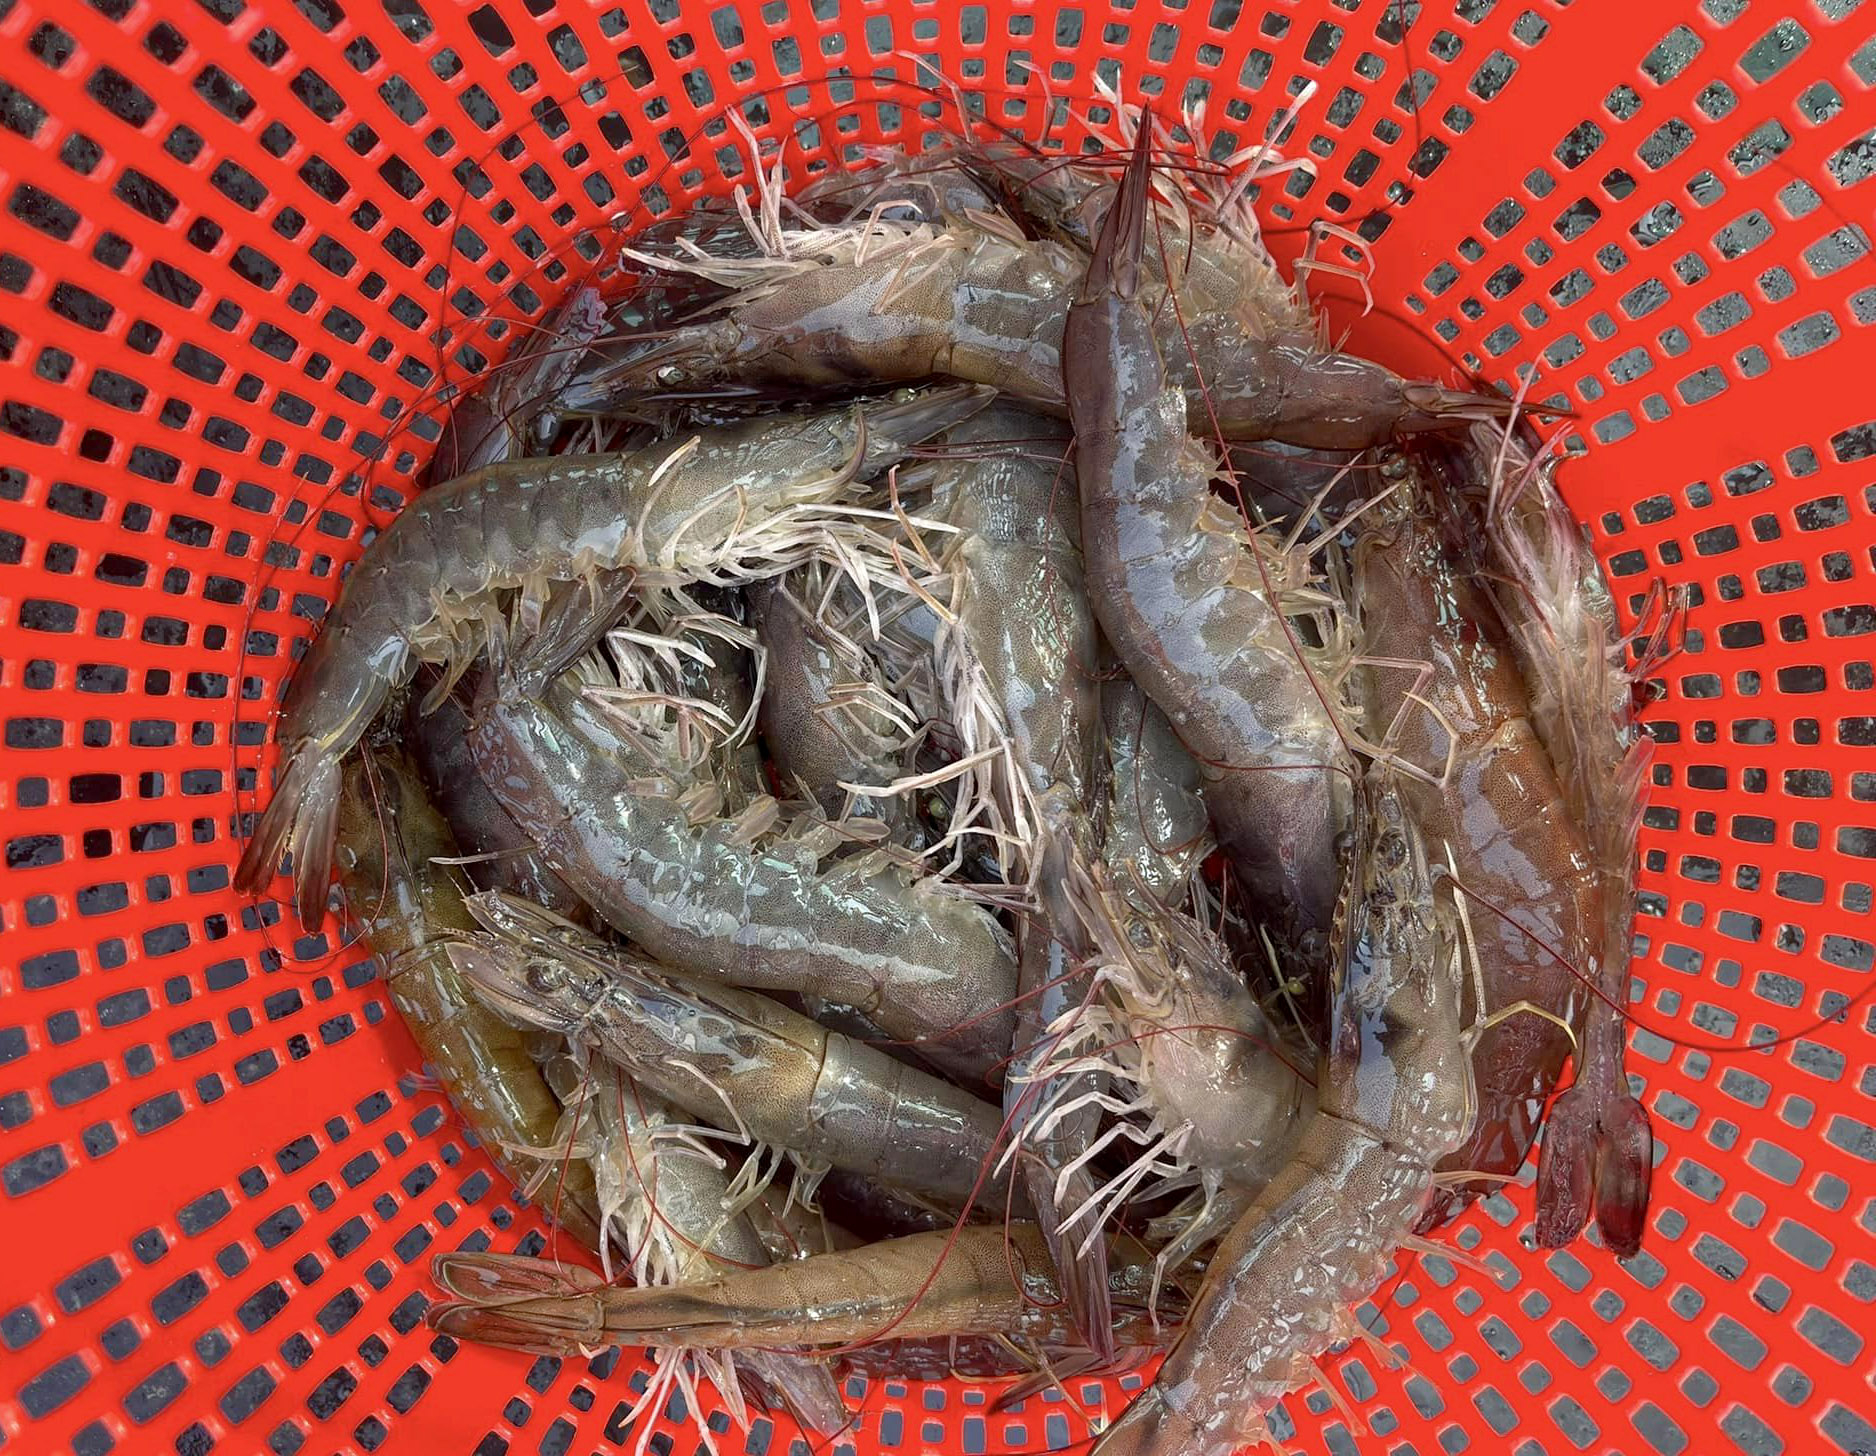 Shrimp prices in the Mekong Delta region are gradually recovering. Photo: Son Trang.